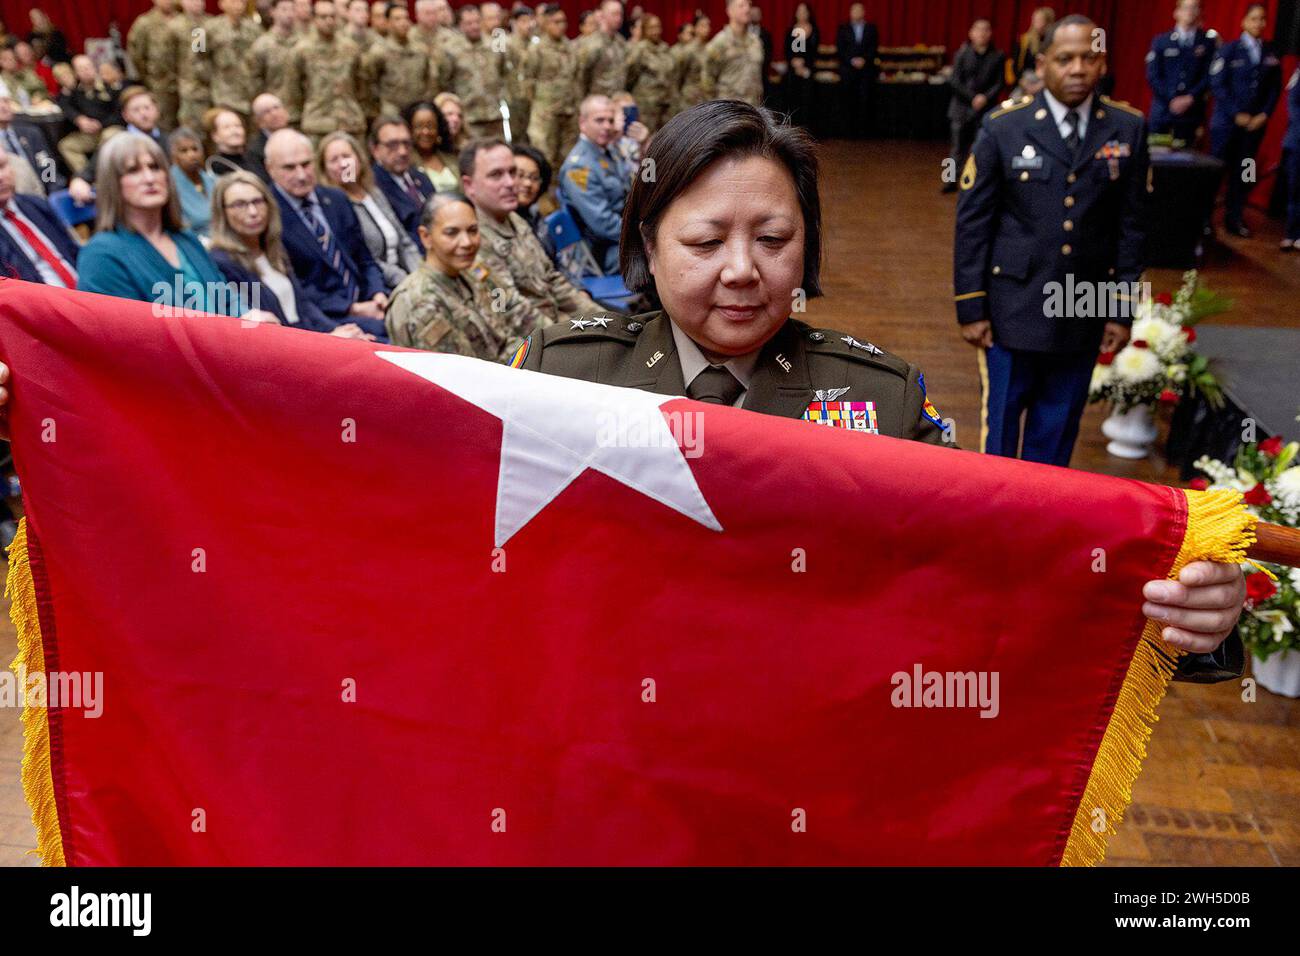 Lawrenceville, New Jersey, USA. 3rd Feb, 2024. Maj. Gen. Lisa J. Hou, D.O., The Adjutant General of New Jersey, watches as her two-star general's flag is unfurled during her promotion ceremony at National Guard Armory in Lawrenceville, New Jersey, February. 3, 2024. Hou, the 33rd Adjutant General of New Jersey, commands more than 8,400 Soldiers and Airmen of the New Jersey National Guard. As Commissioner of the New Jersey Department of Military and Veterans Affairs, Hou leads, directs, and manages the New Jersey Department of Military and Veterans Affairs in the execution of federal and Stock Photo